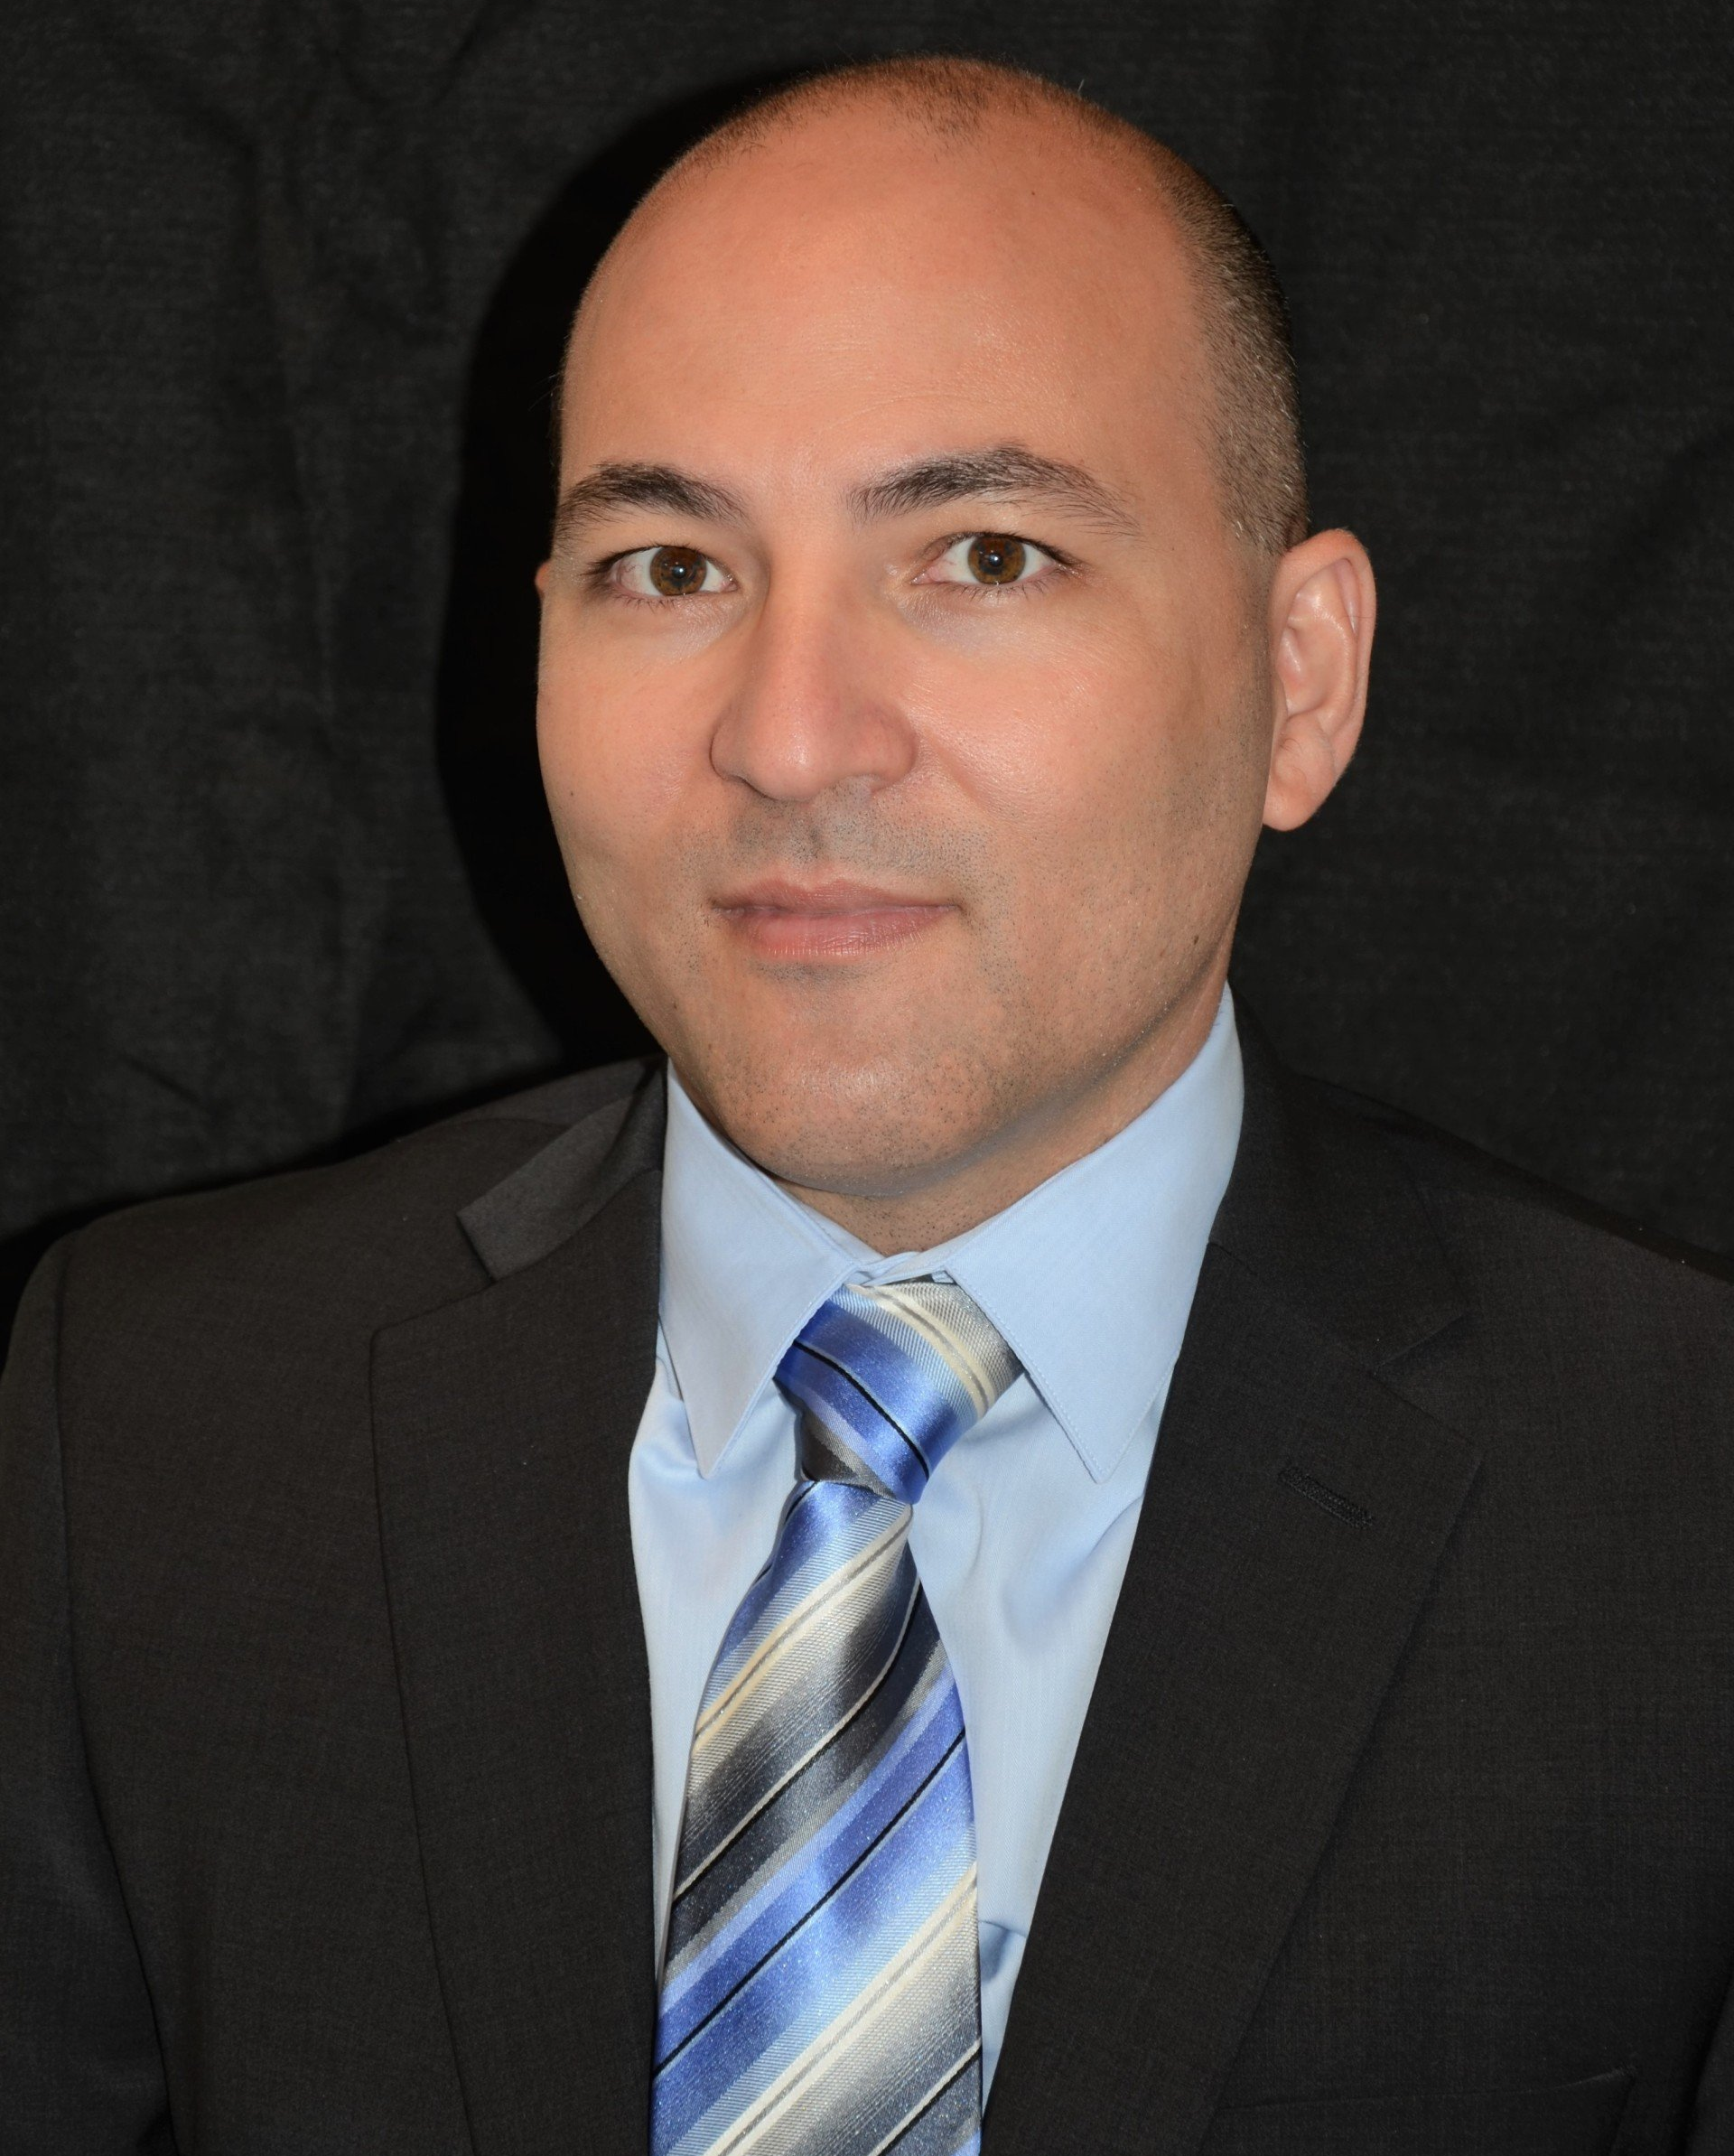 Dr. Rafael A. Ching Companioni at Digestive Diseases Center